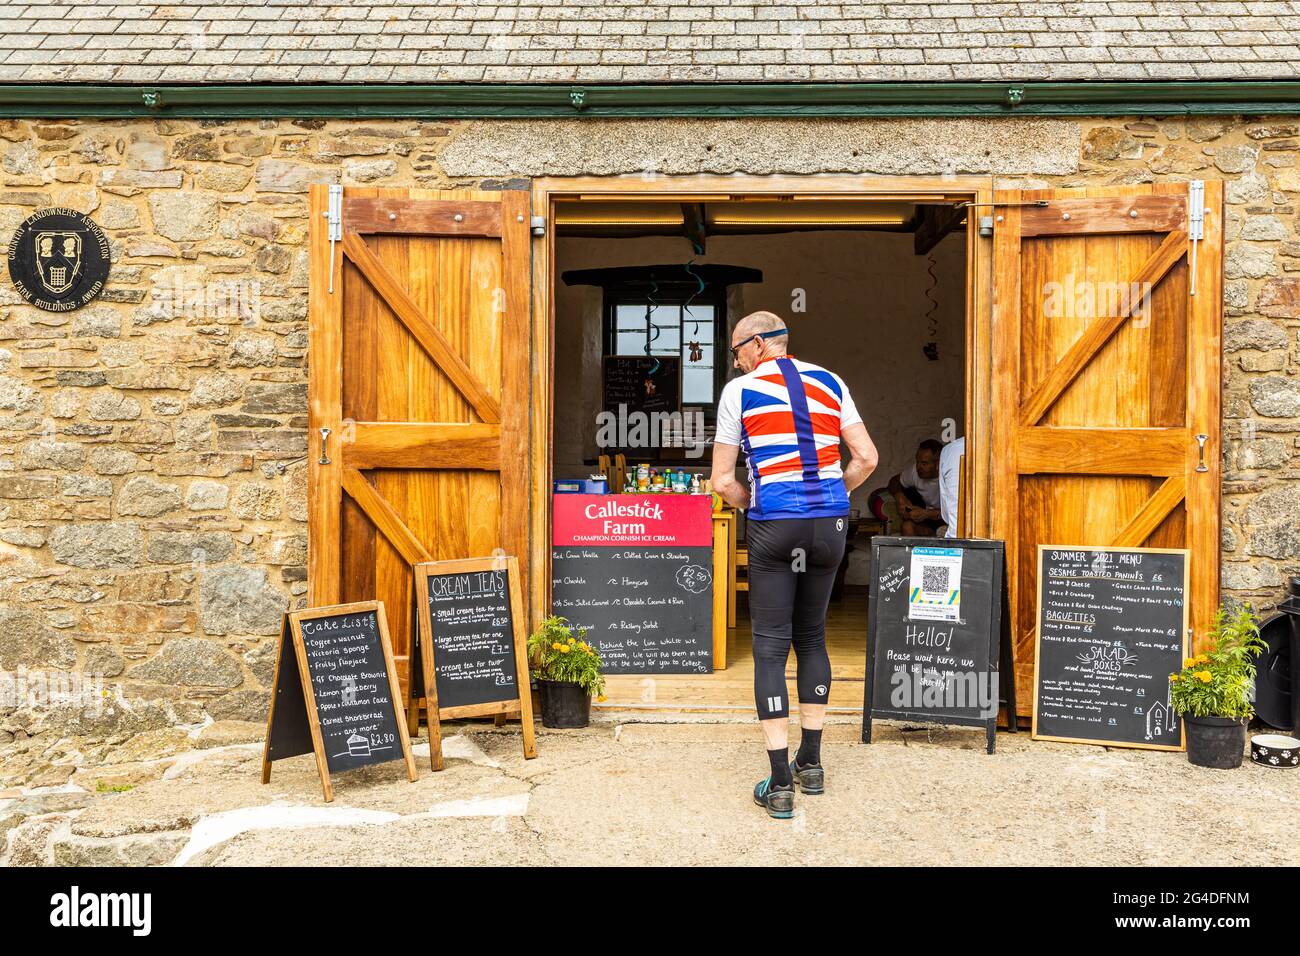 A cyclist wearing a union flag summer shirt, stops for a break at a well known cafe eatery close to St Agnes Cornwall England UK Stock Photo